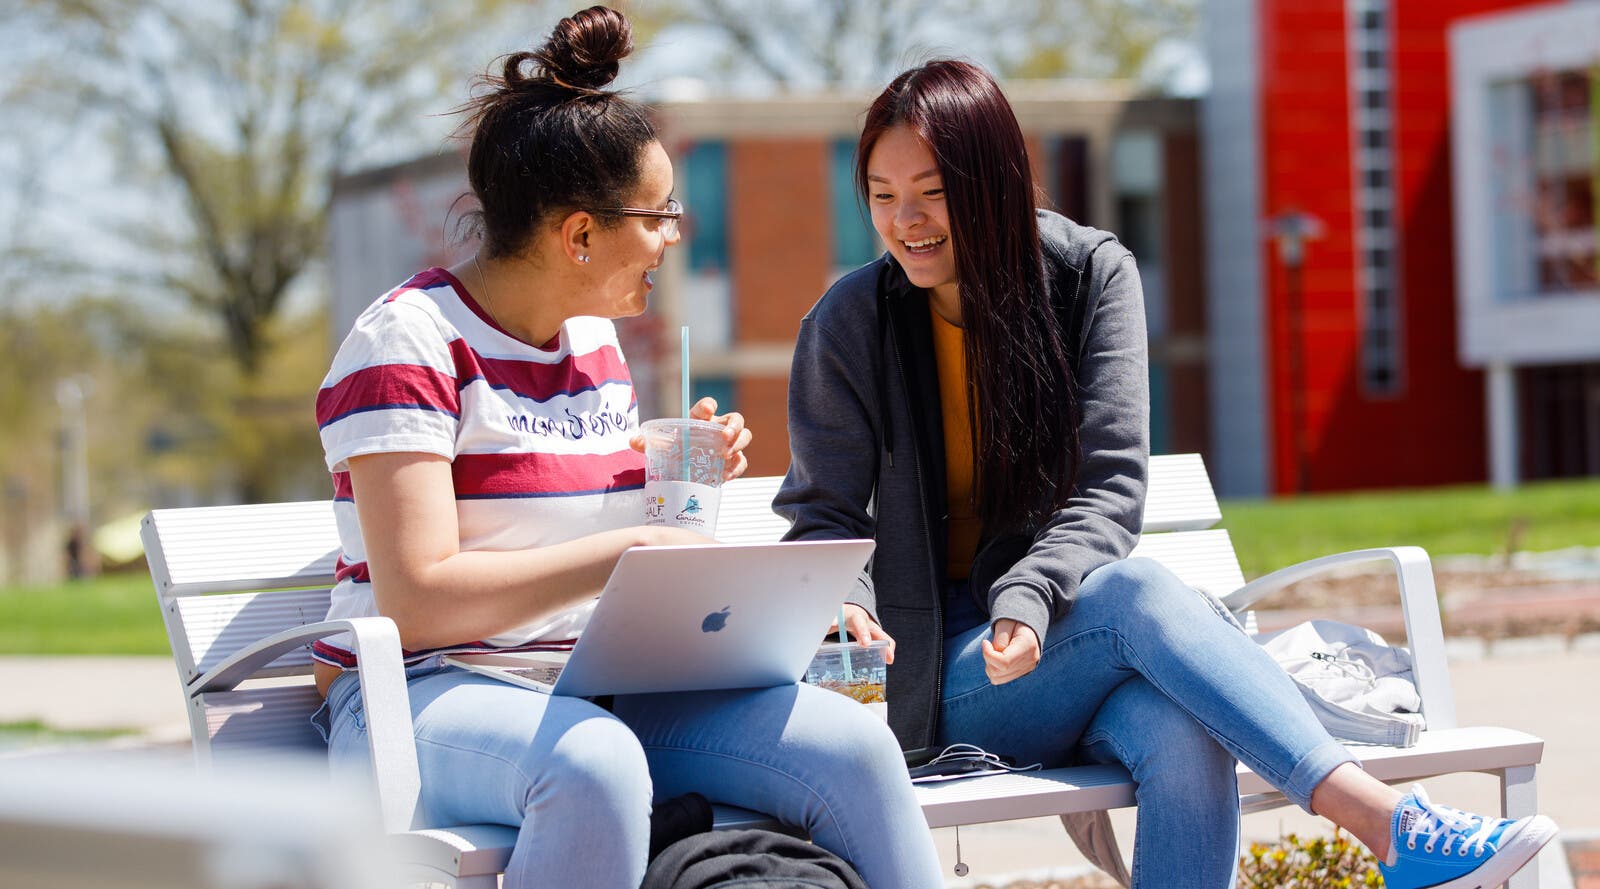 Two students looking at a laptop and drinking coffee outside